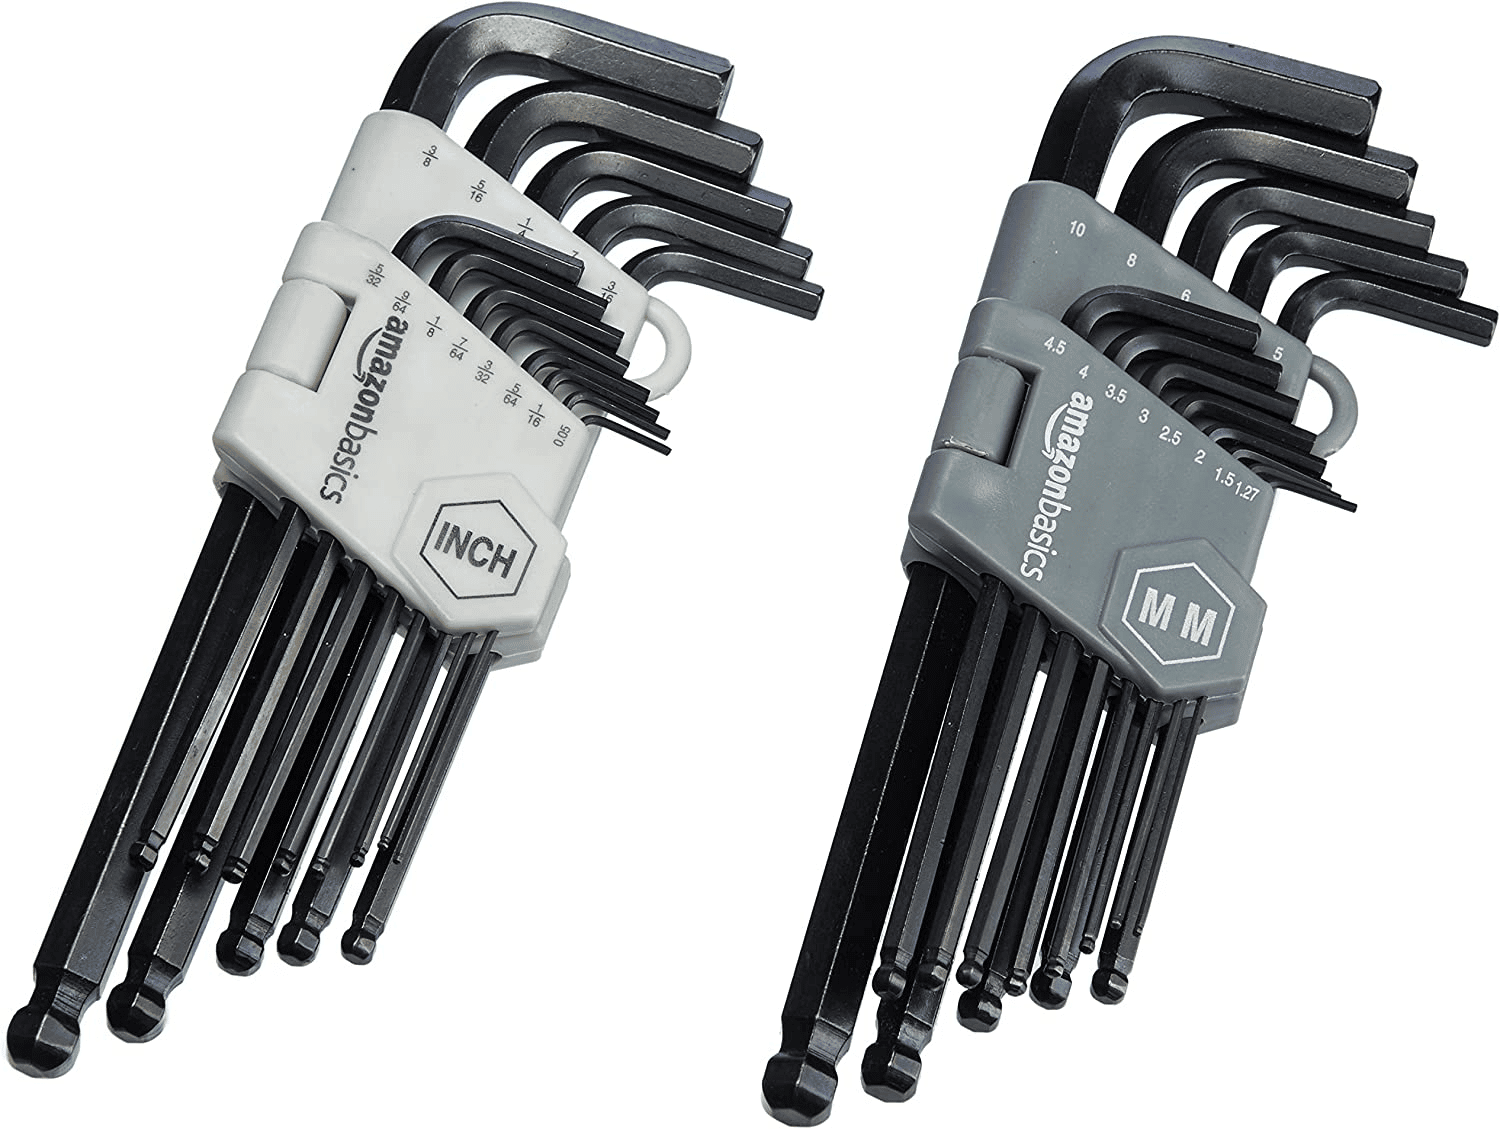 Allen keys like these are handy for any type of maintenance of your mountain bike.